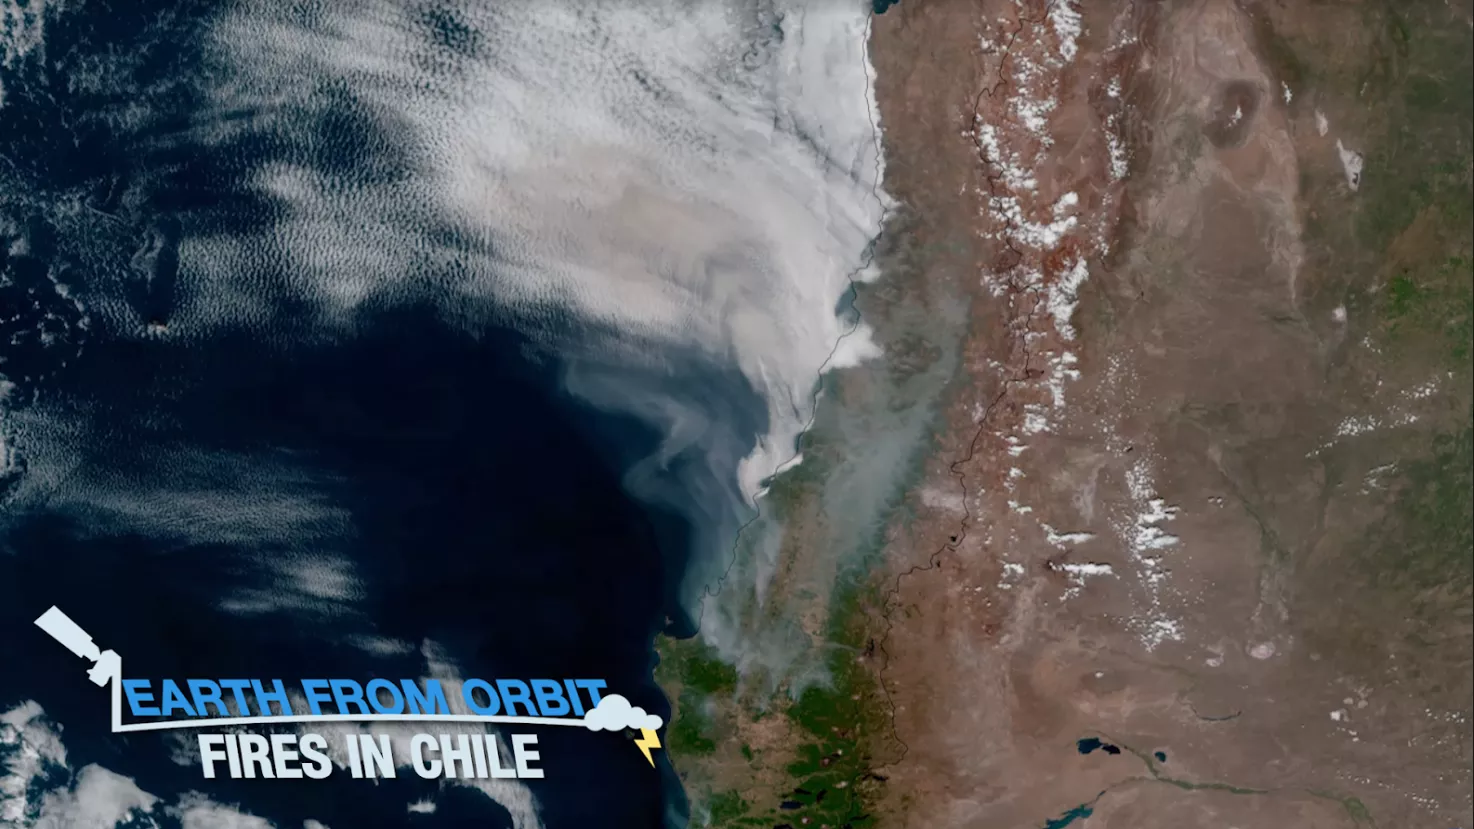 Earth from Orbit title card shows satellite imagery of the Chilean fires. It says "Earth from Orbit: Fires in Chile" in the bottom left corner. 